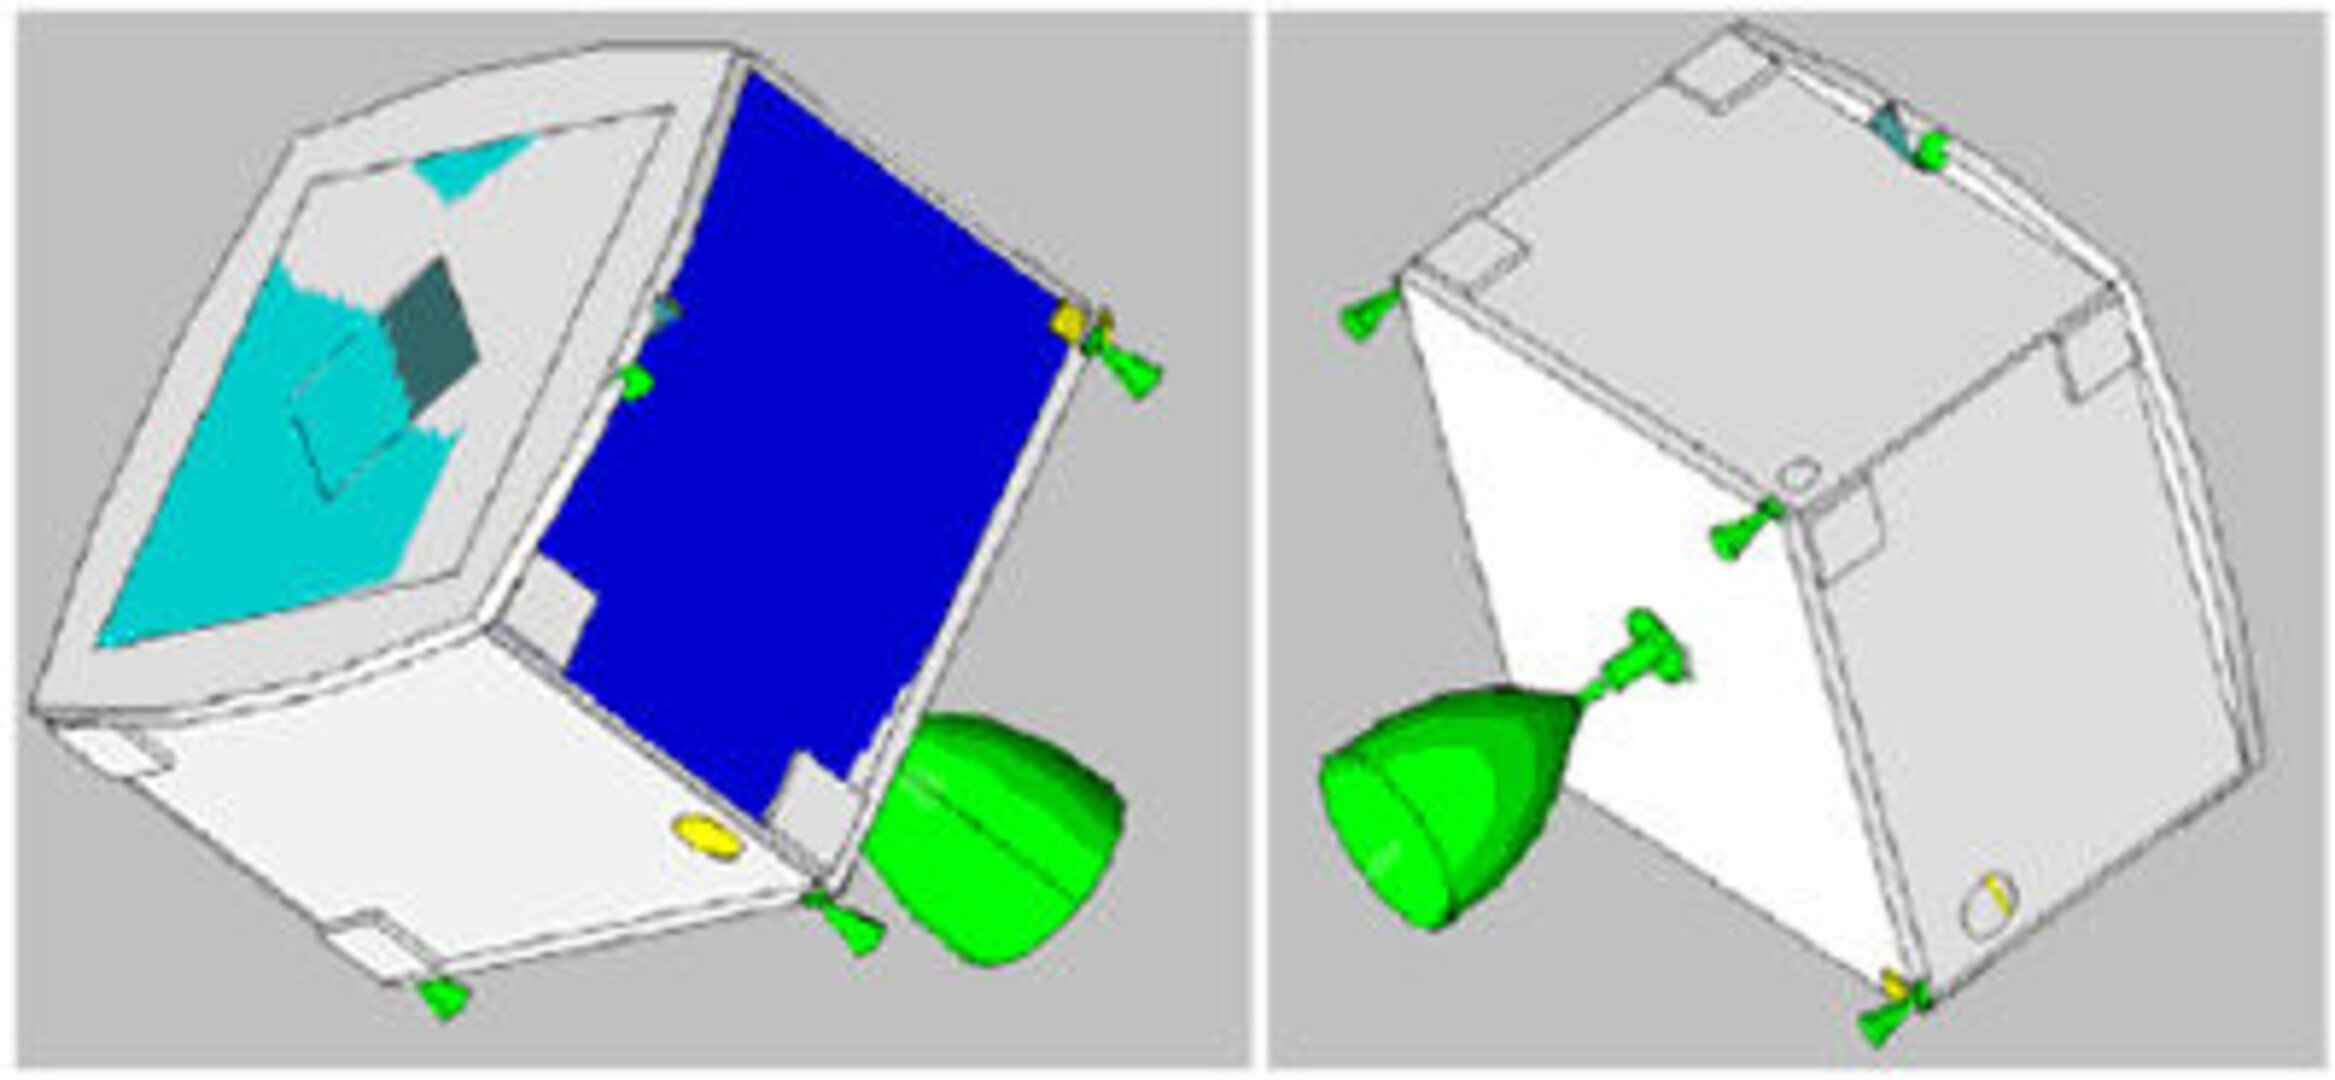 Phase A design of the ESMO spacecraft